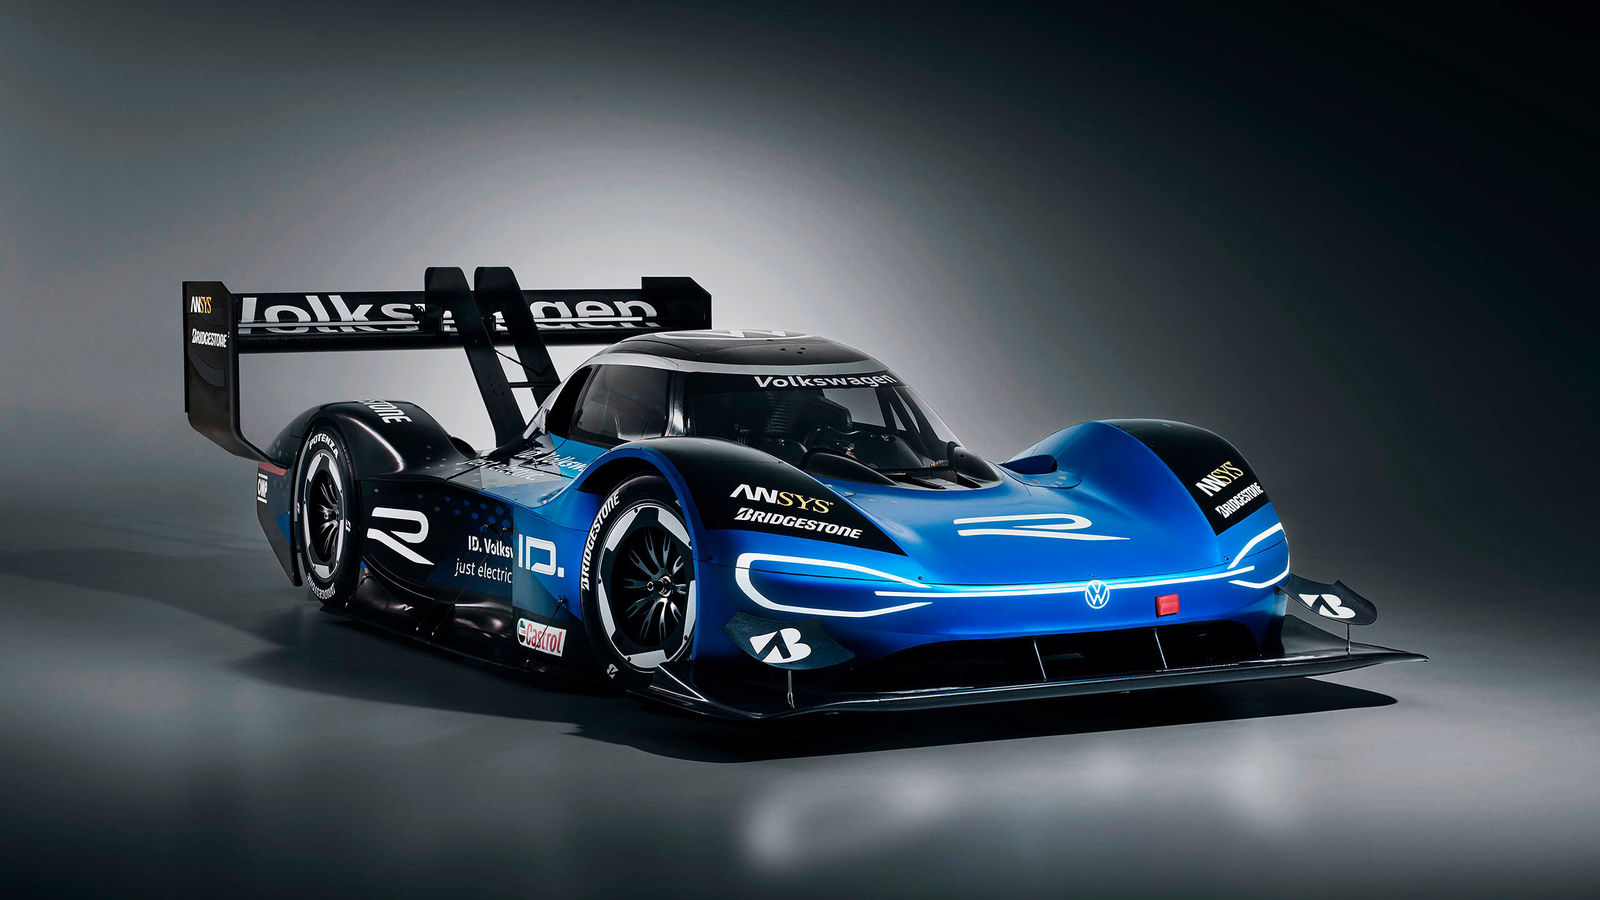 Ready for the electric future: Volkswagen is focusing its motorsport strategy on e-mobility